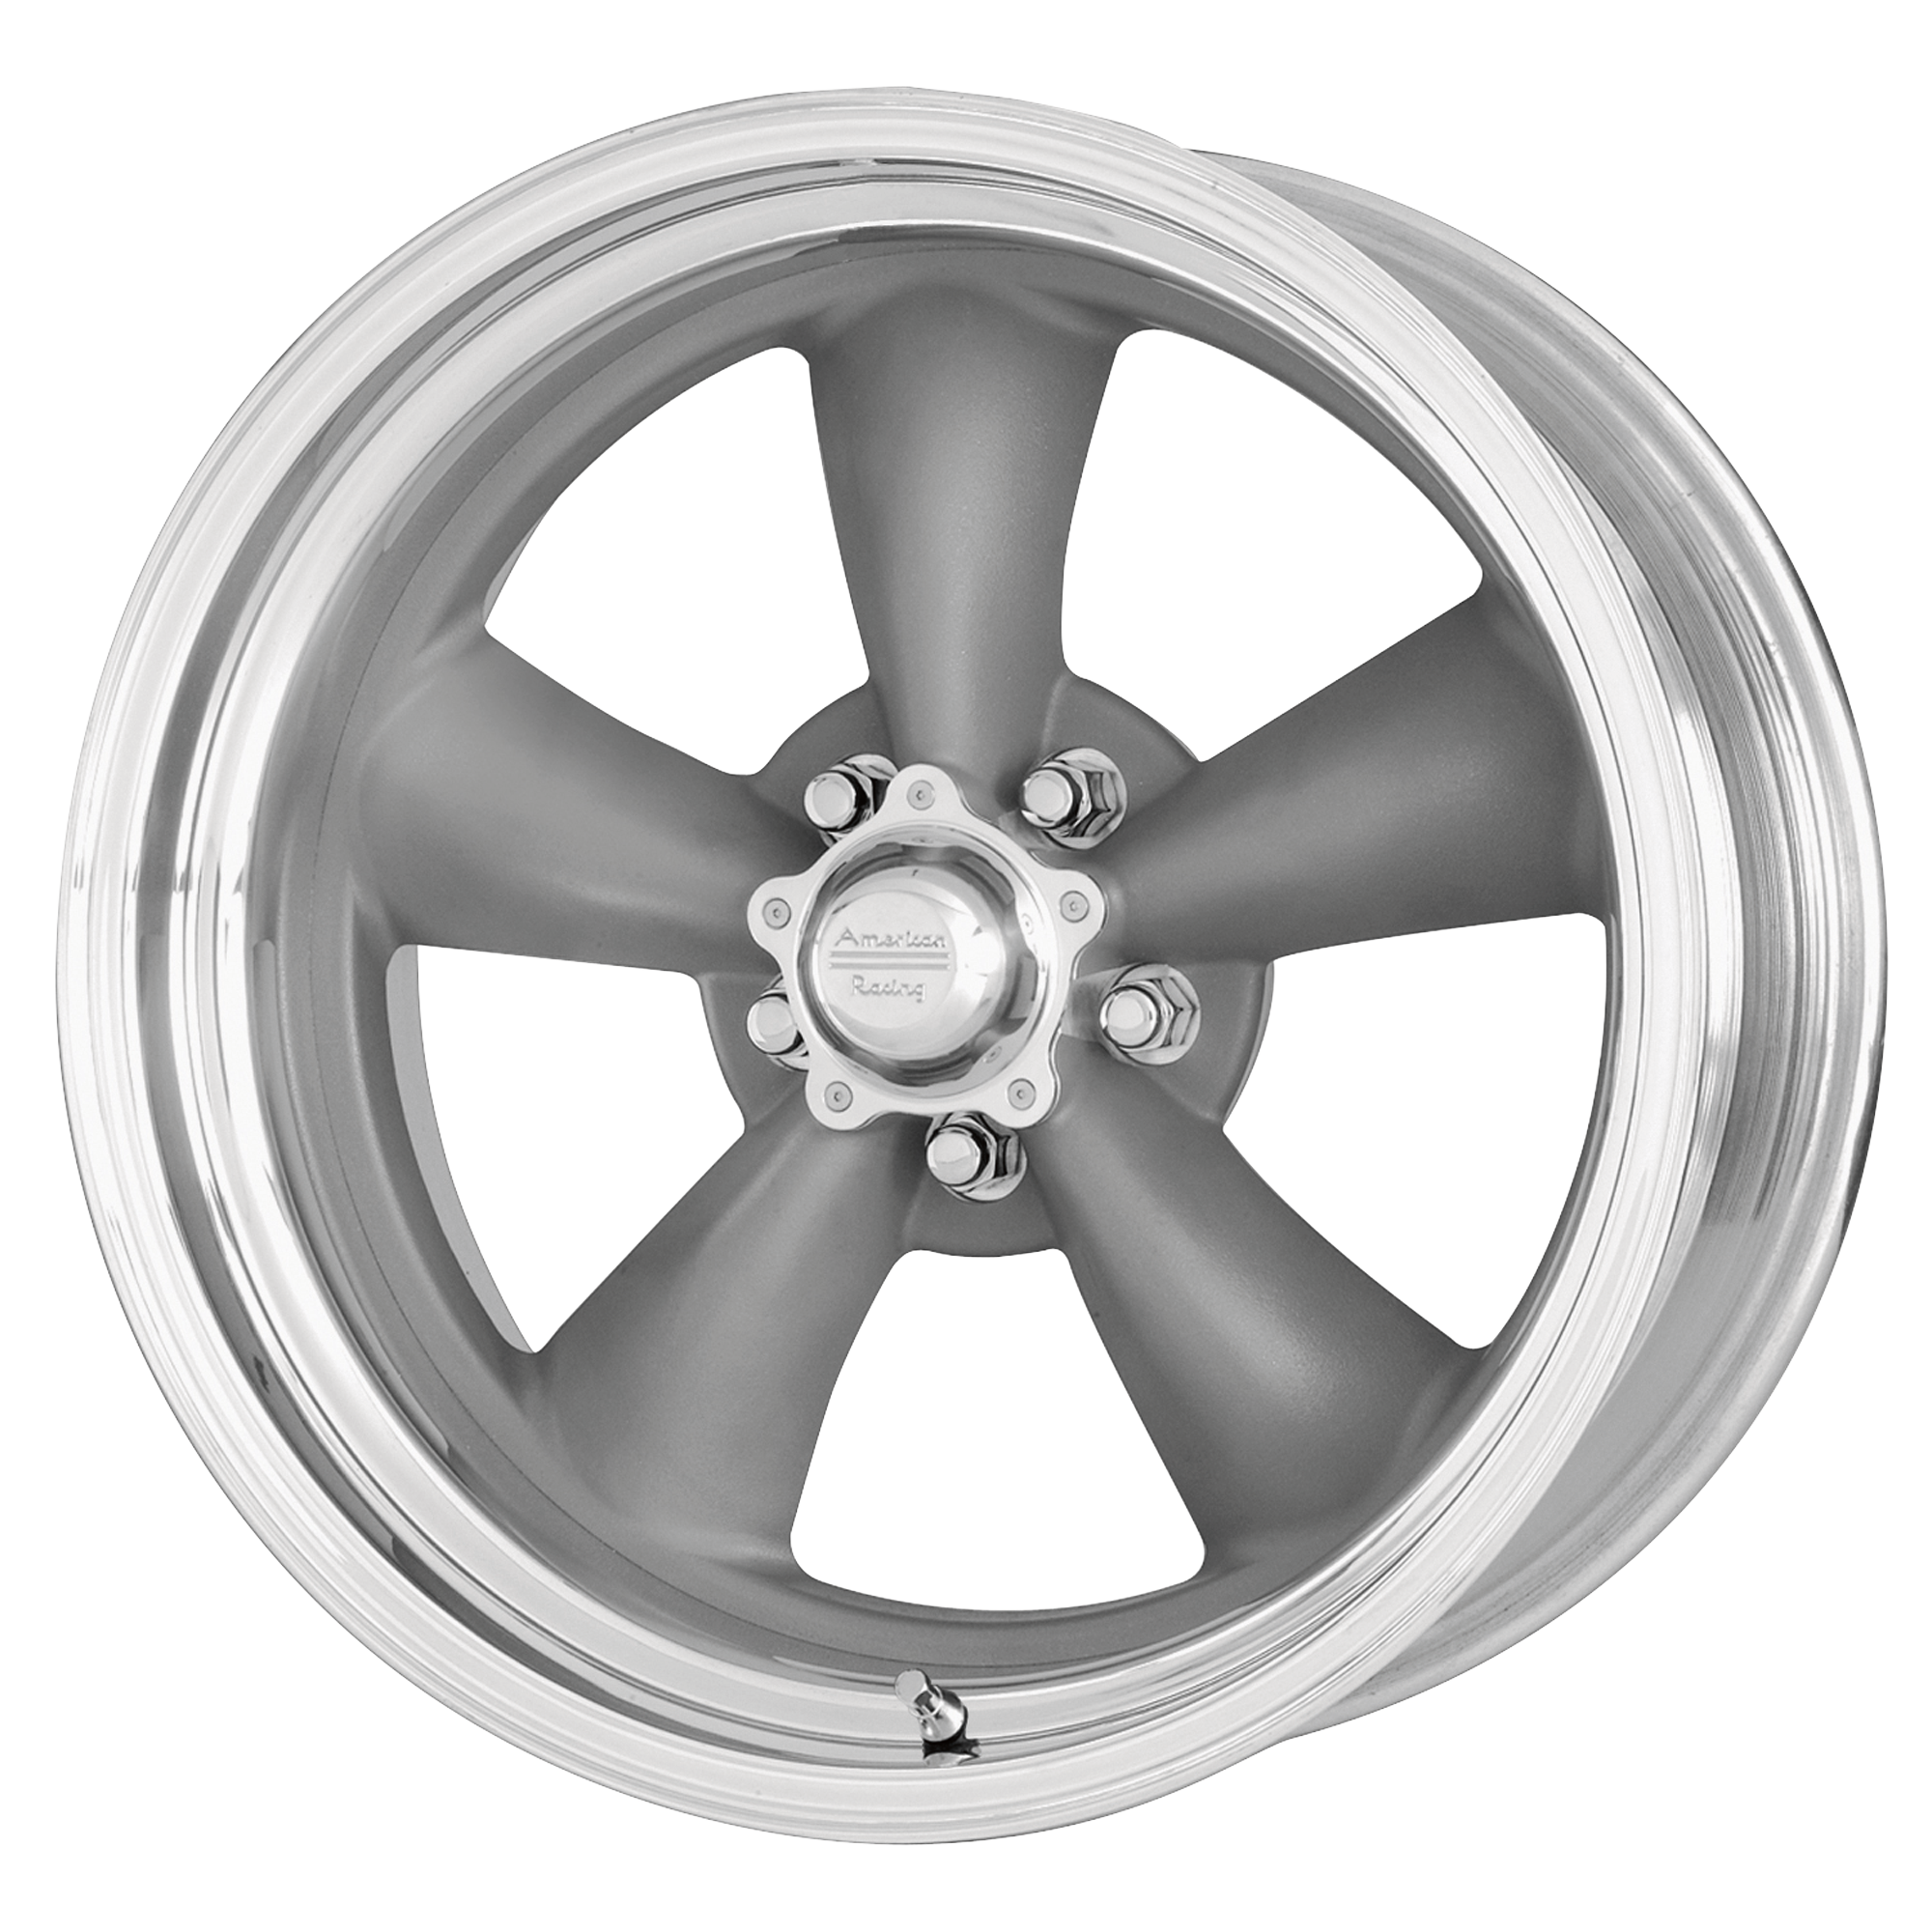 CLASSIC TORQ THRUST II ONE PIECE 18x10 5x127.00 MAG GRAY W/ MACHINED LIP (6 mm) - Tires and Engine Performance